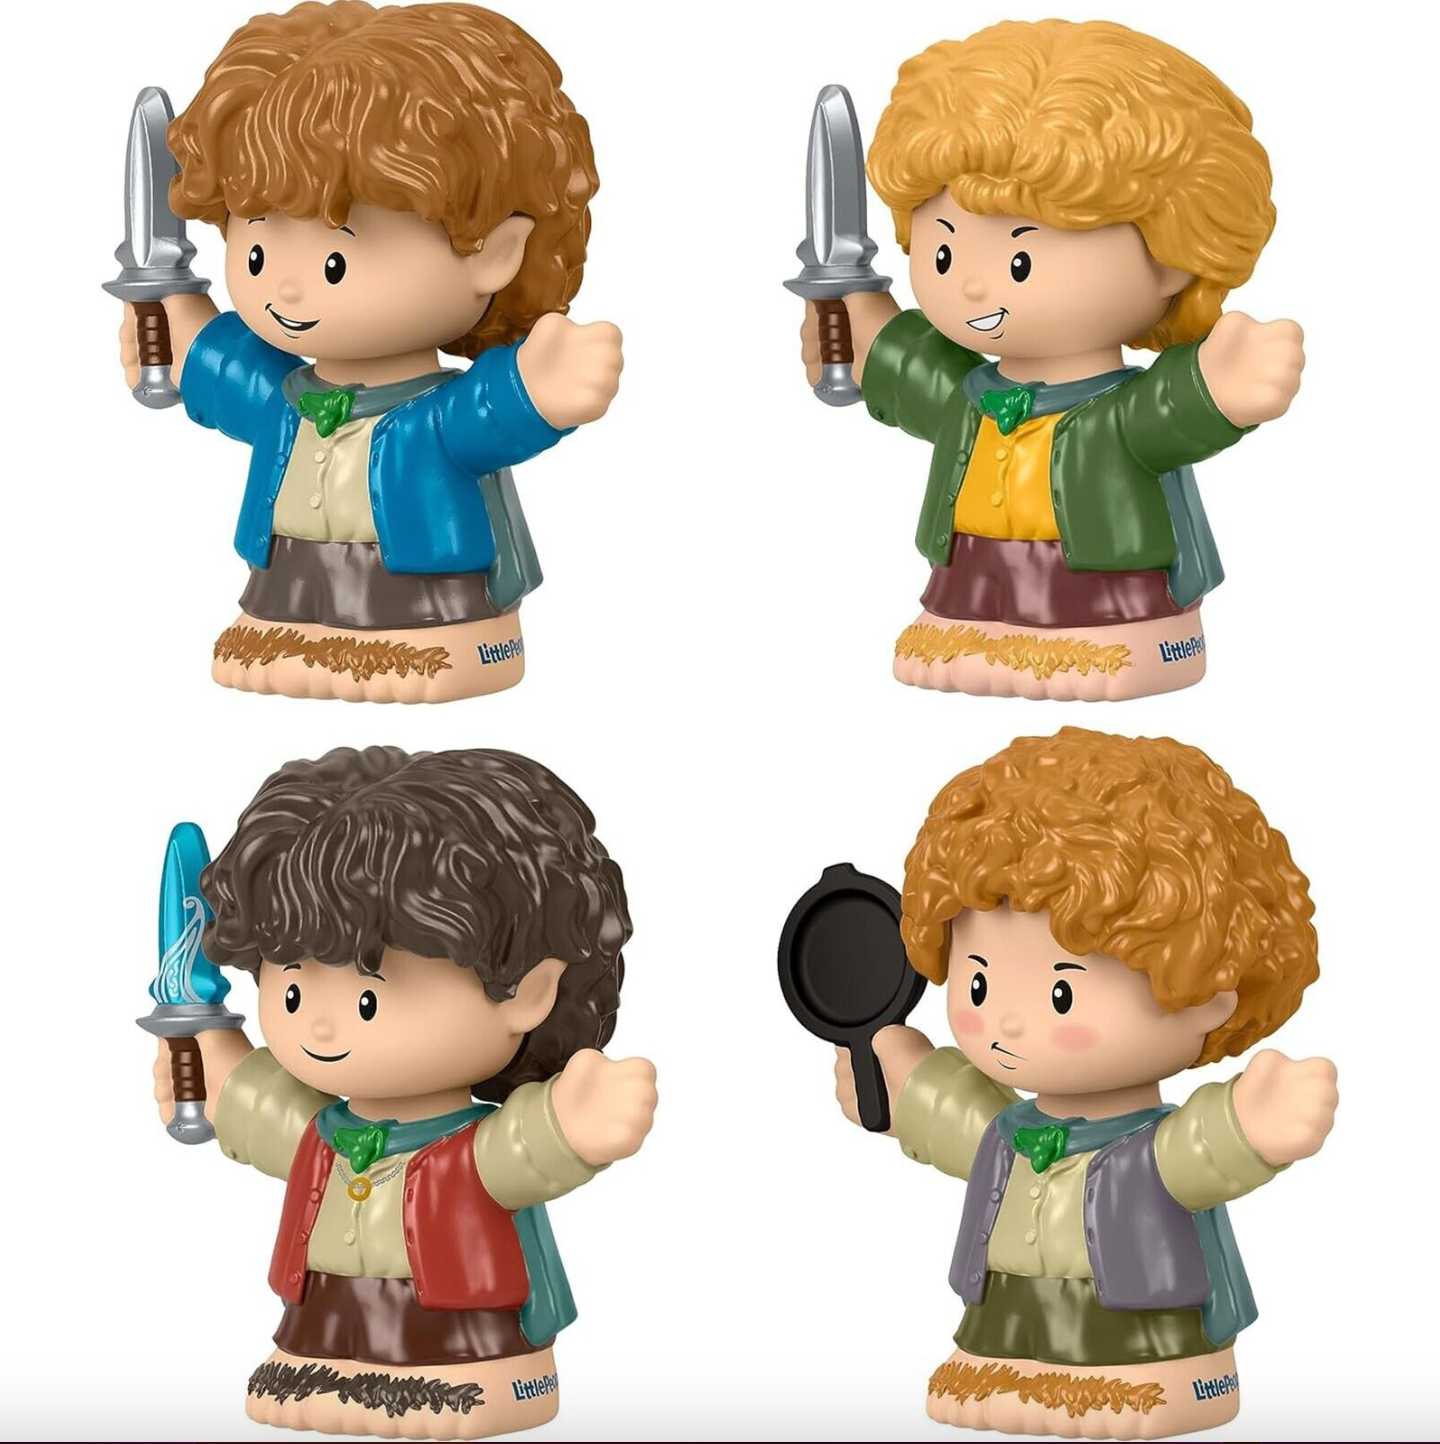 Lord of the Rings Little People Toy Sets